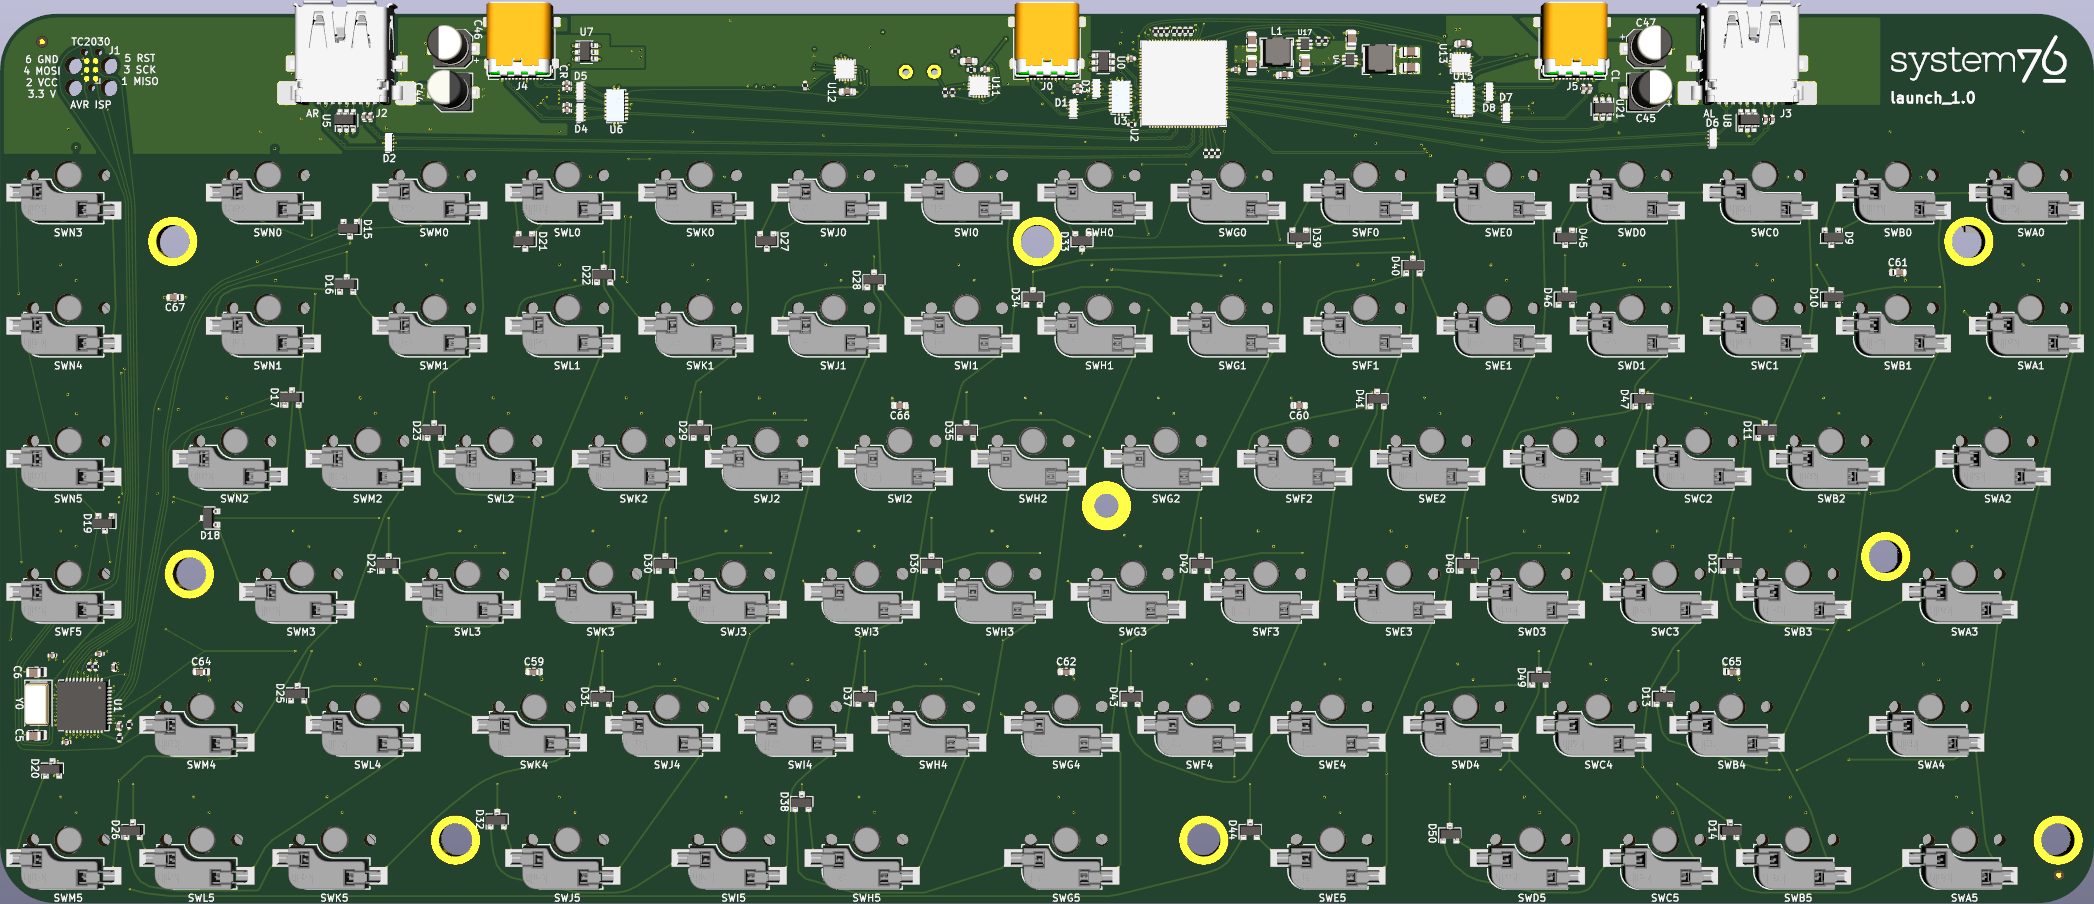 Nom : launch-pcb.png
Affichages : 2560
Taille : 657,1 Ko